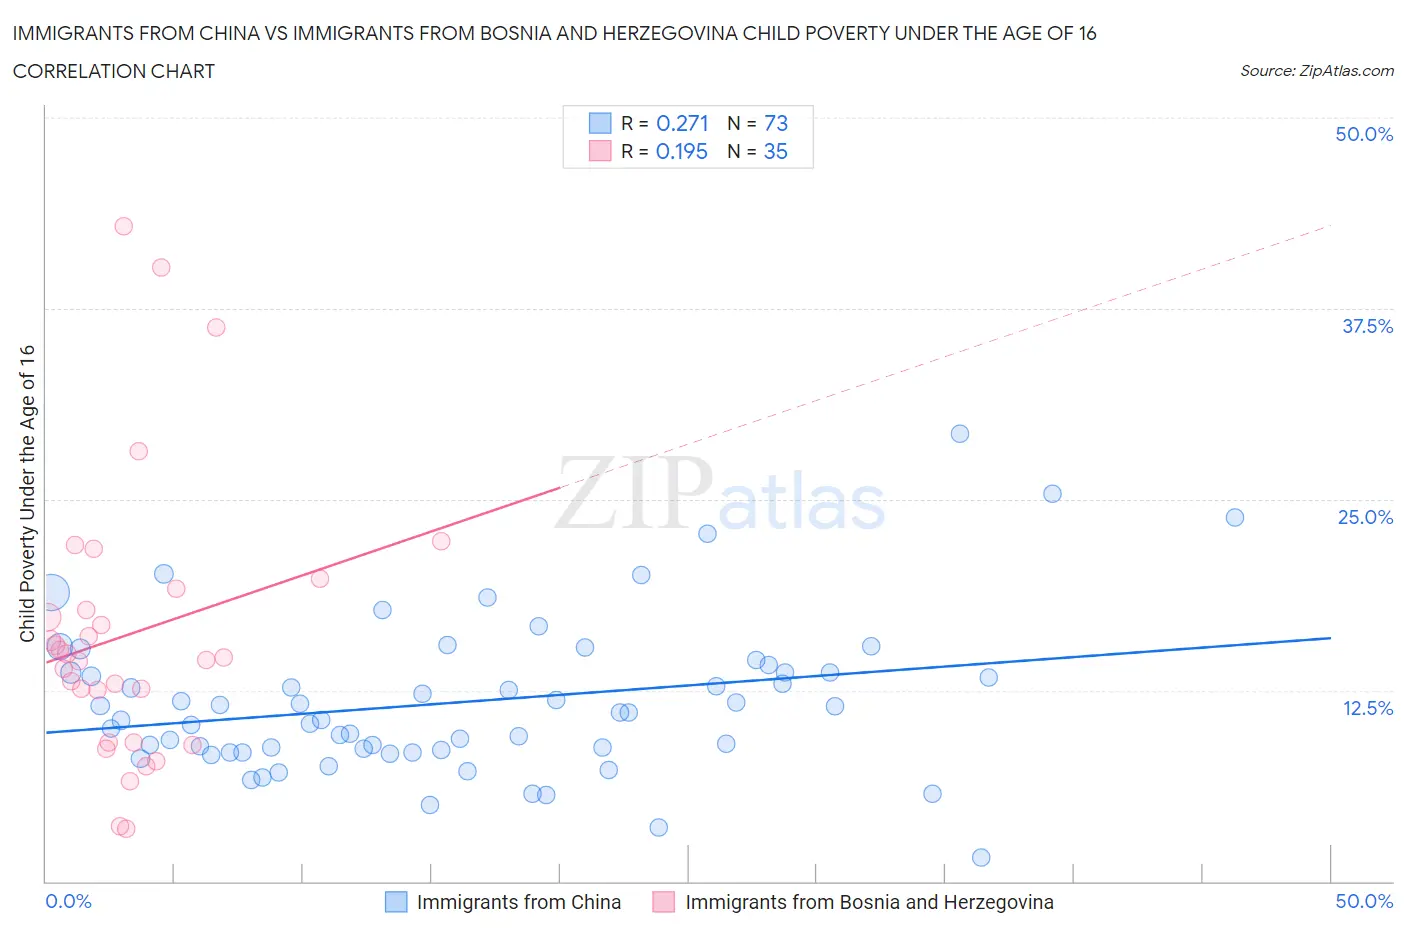 Immigrants from China vs Immigrants from Bosnia and Herzegovina Child Poverty Under the Age of 16